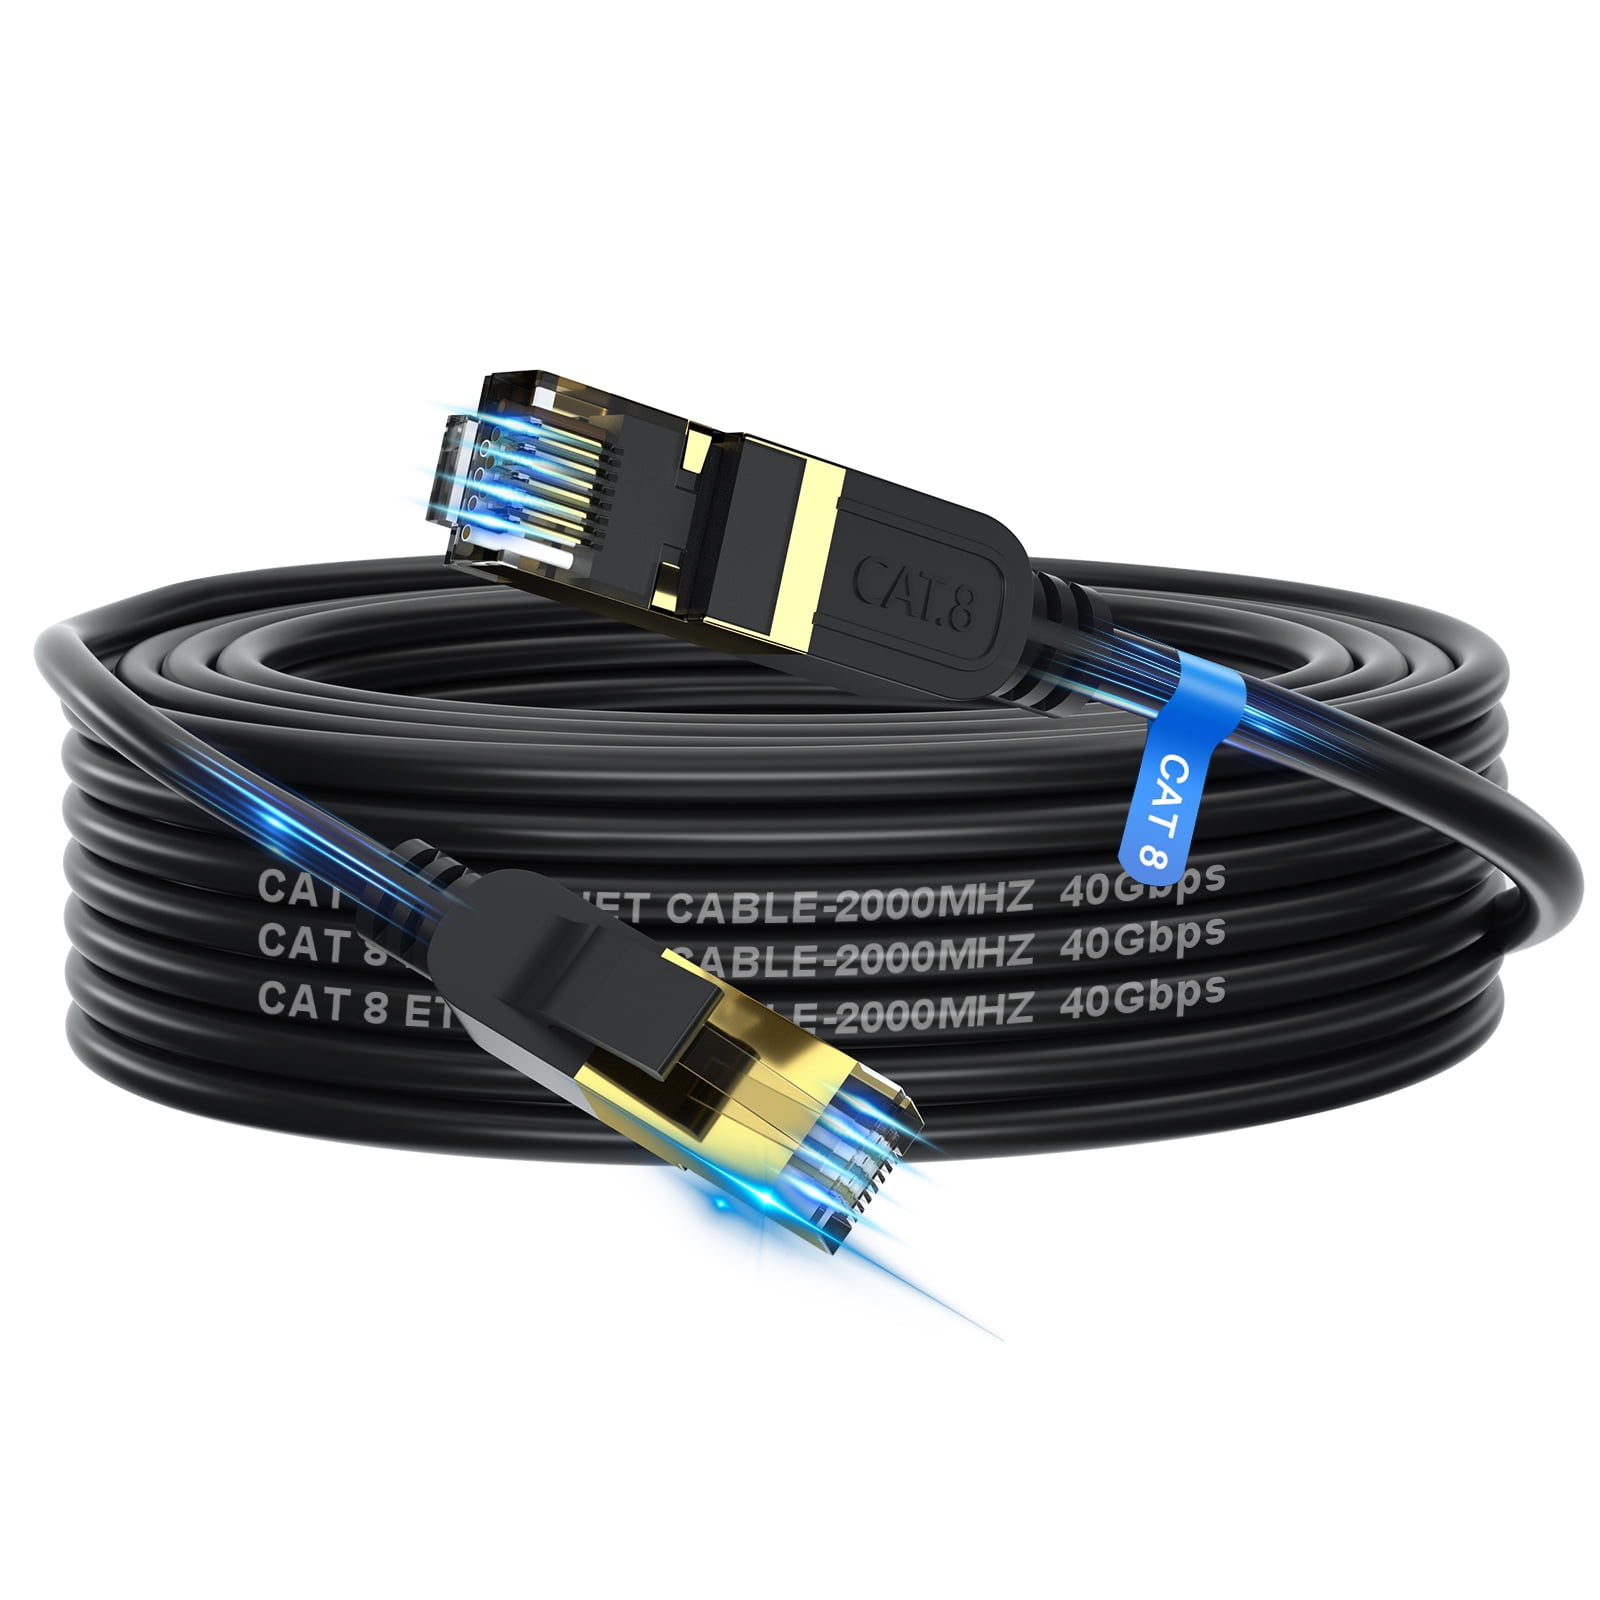 Cat8 Ethernet Cable-85FT, Gold-Plated RJ45 Connector, 26AWG, 40Gbps,  2000Mhz, High-Speed Internet Cable for Gaming, Streaming and Office Use 